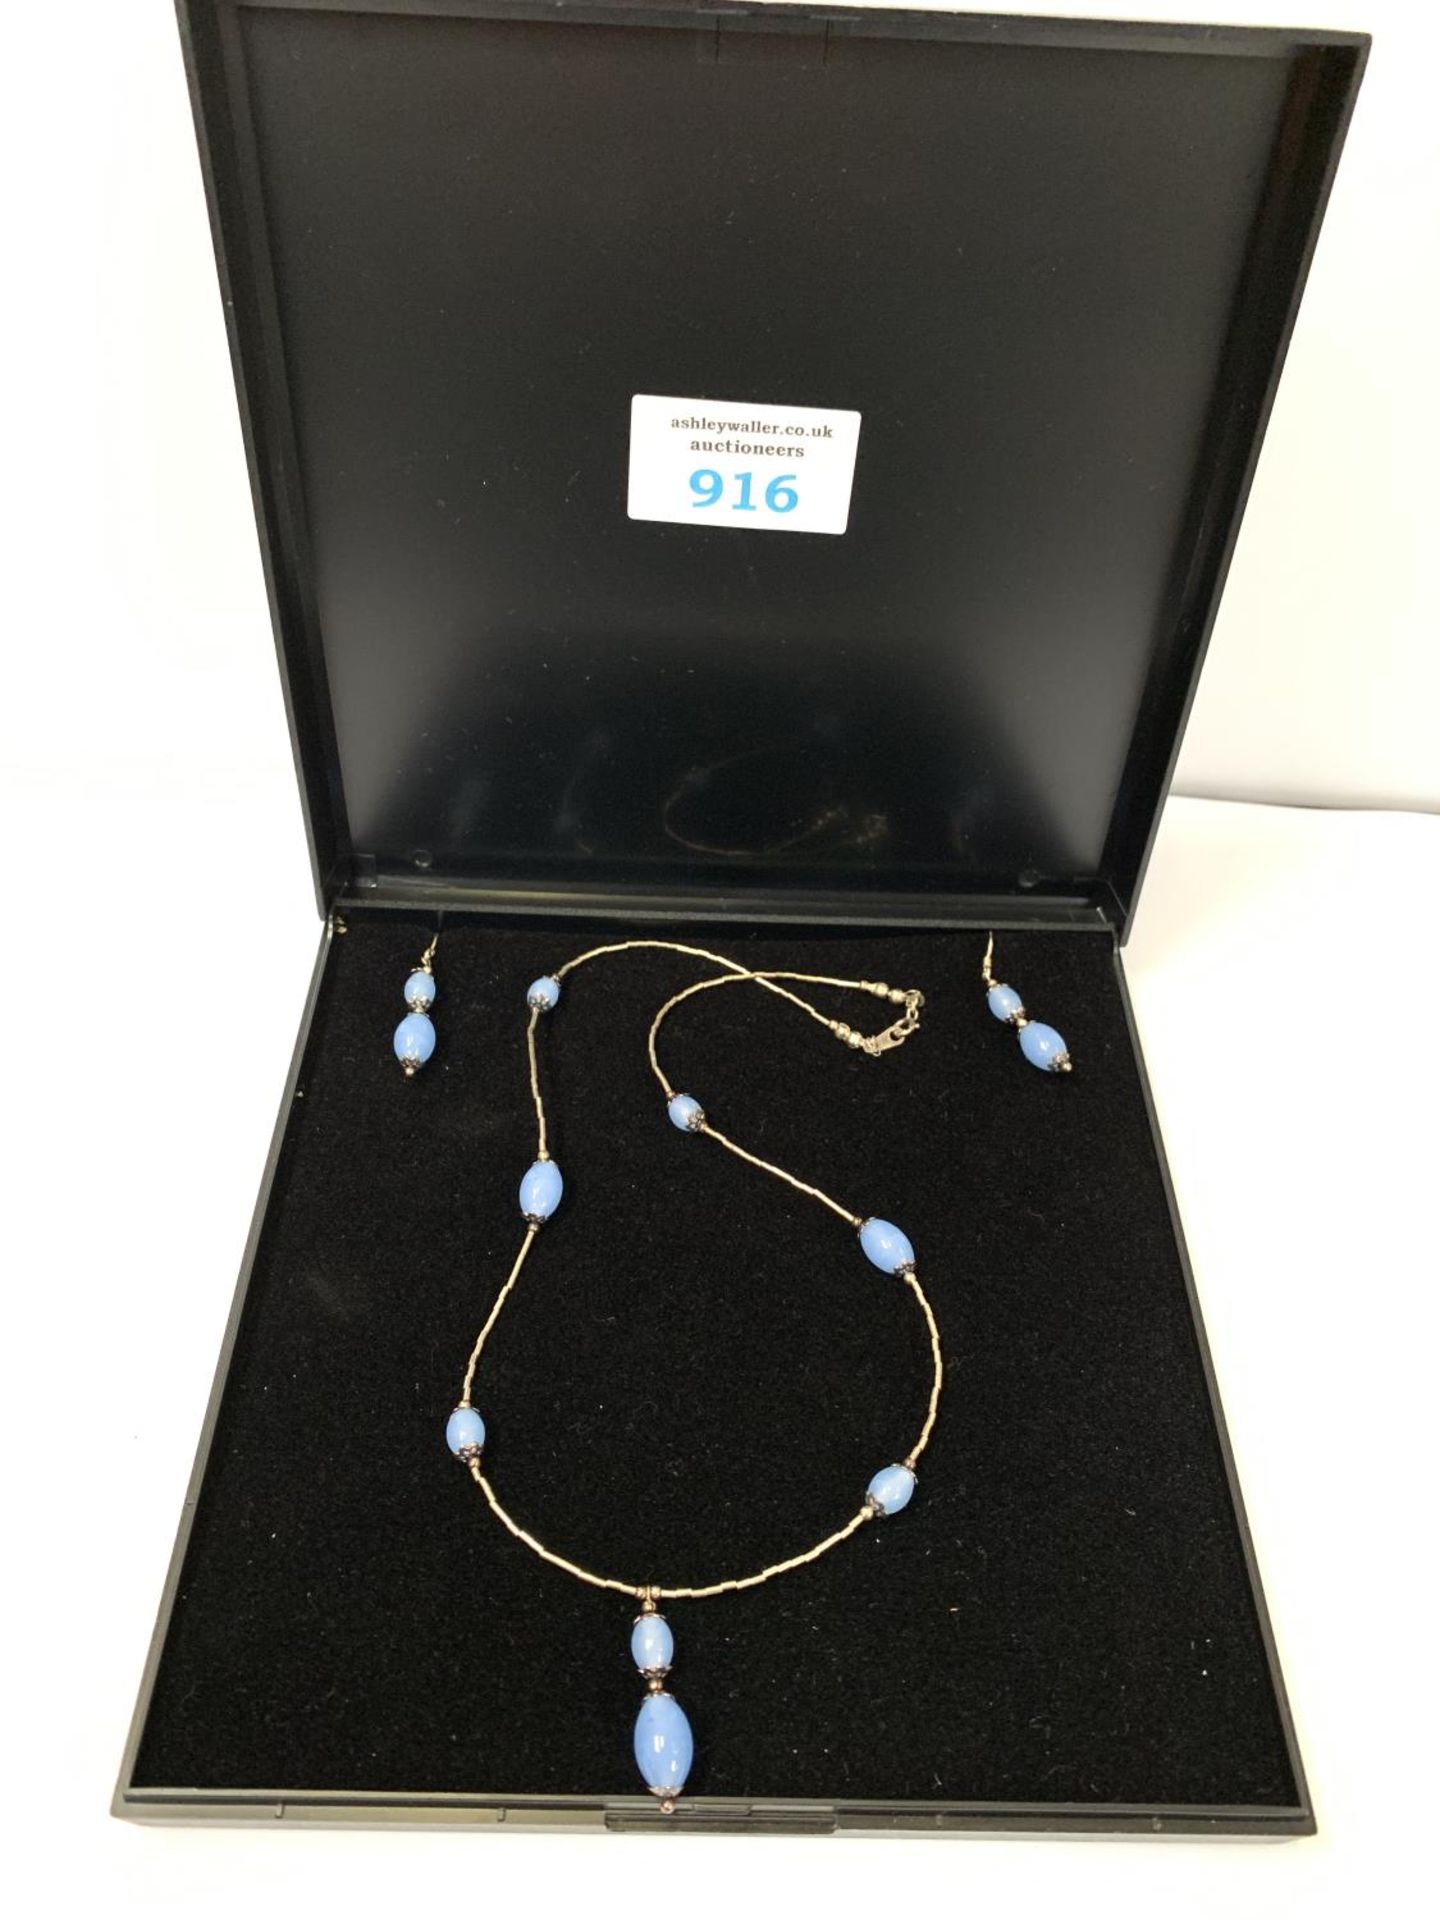 A BOXED SILVER NECKLACE AND EARRINGS SET WITH BLUE STONES